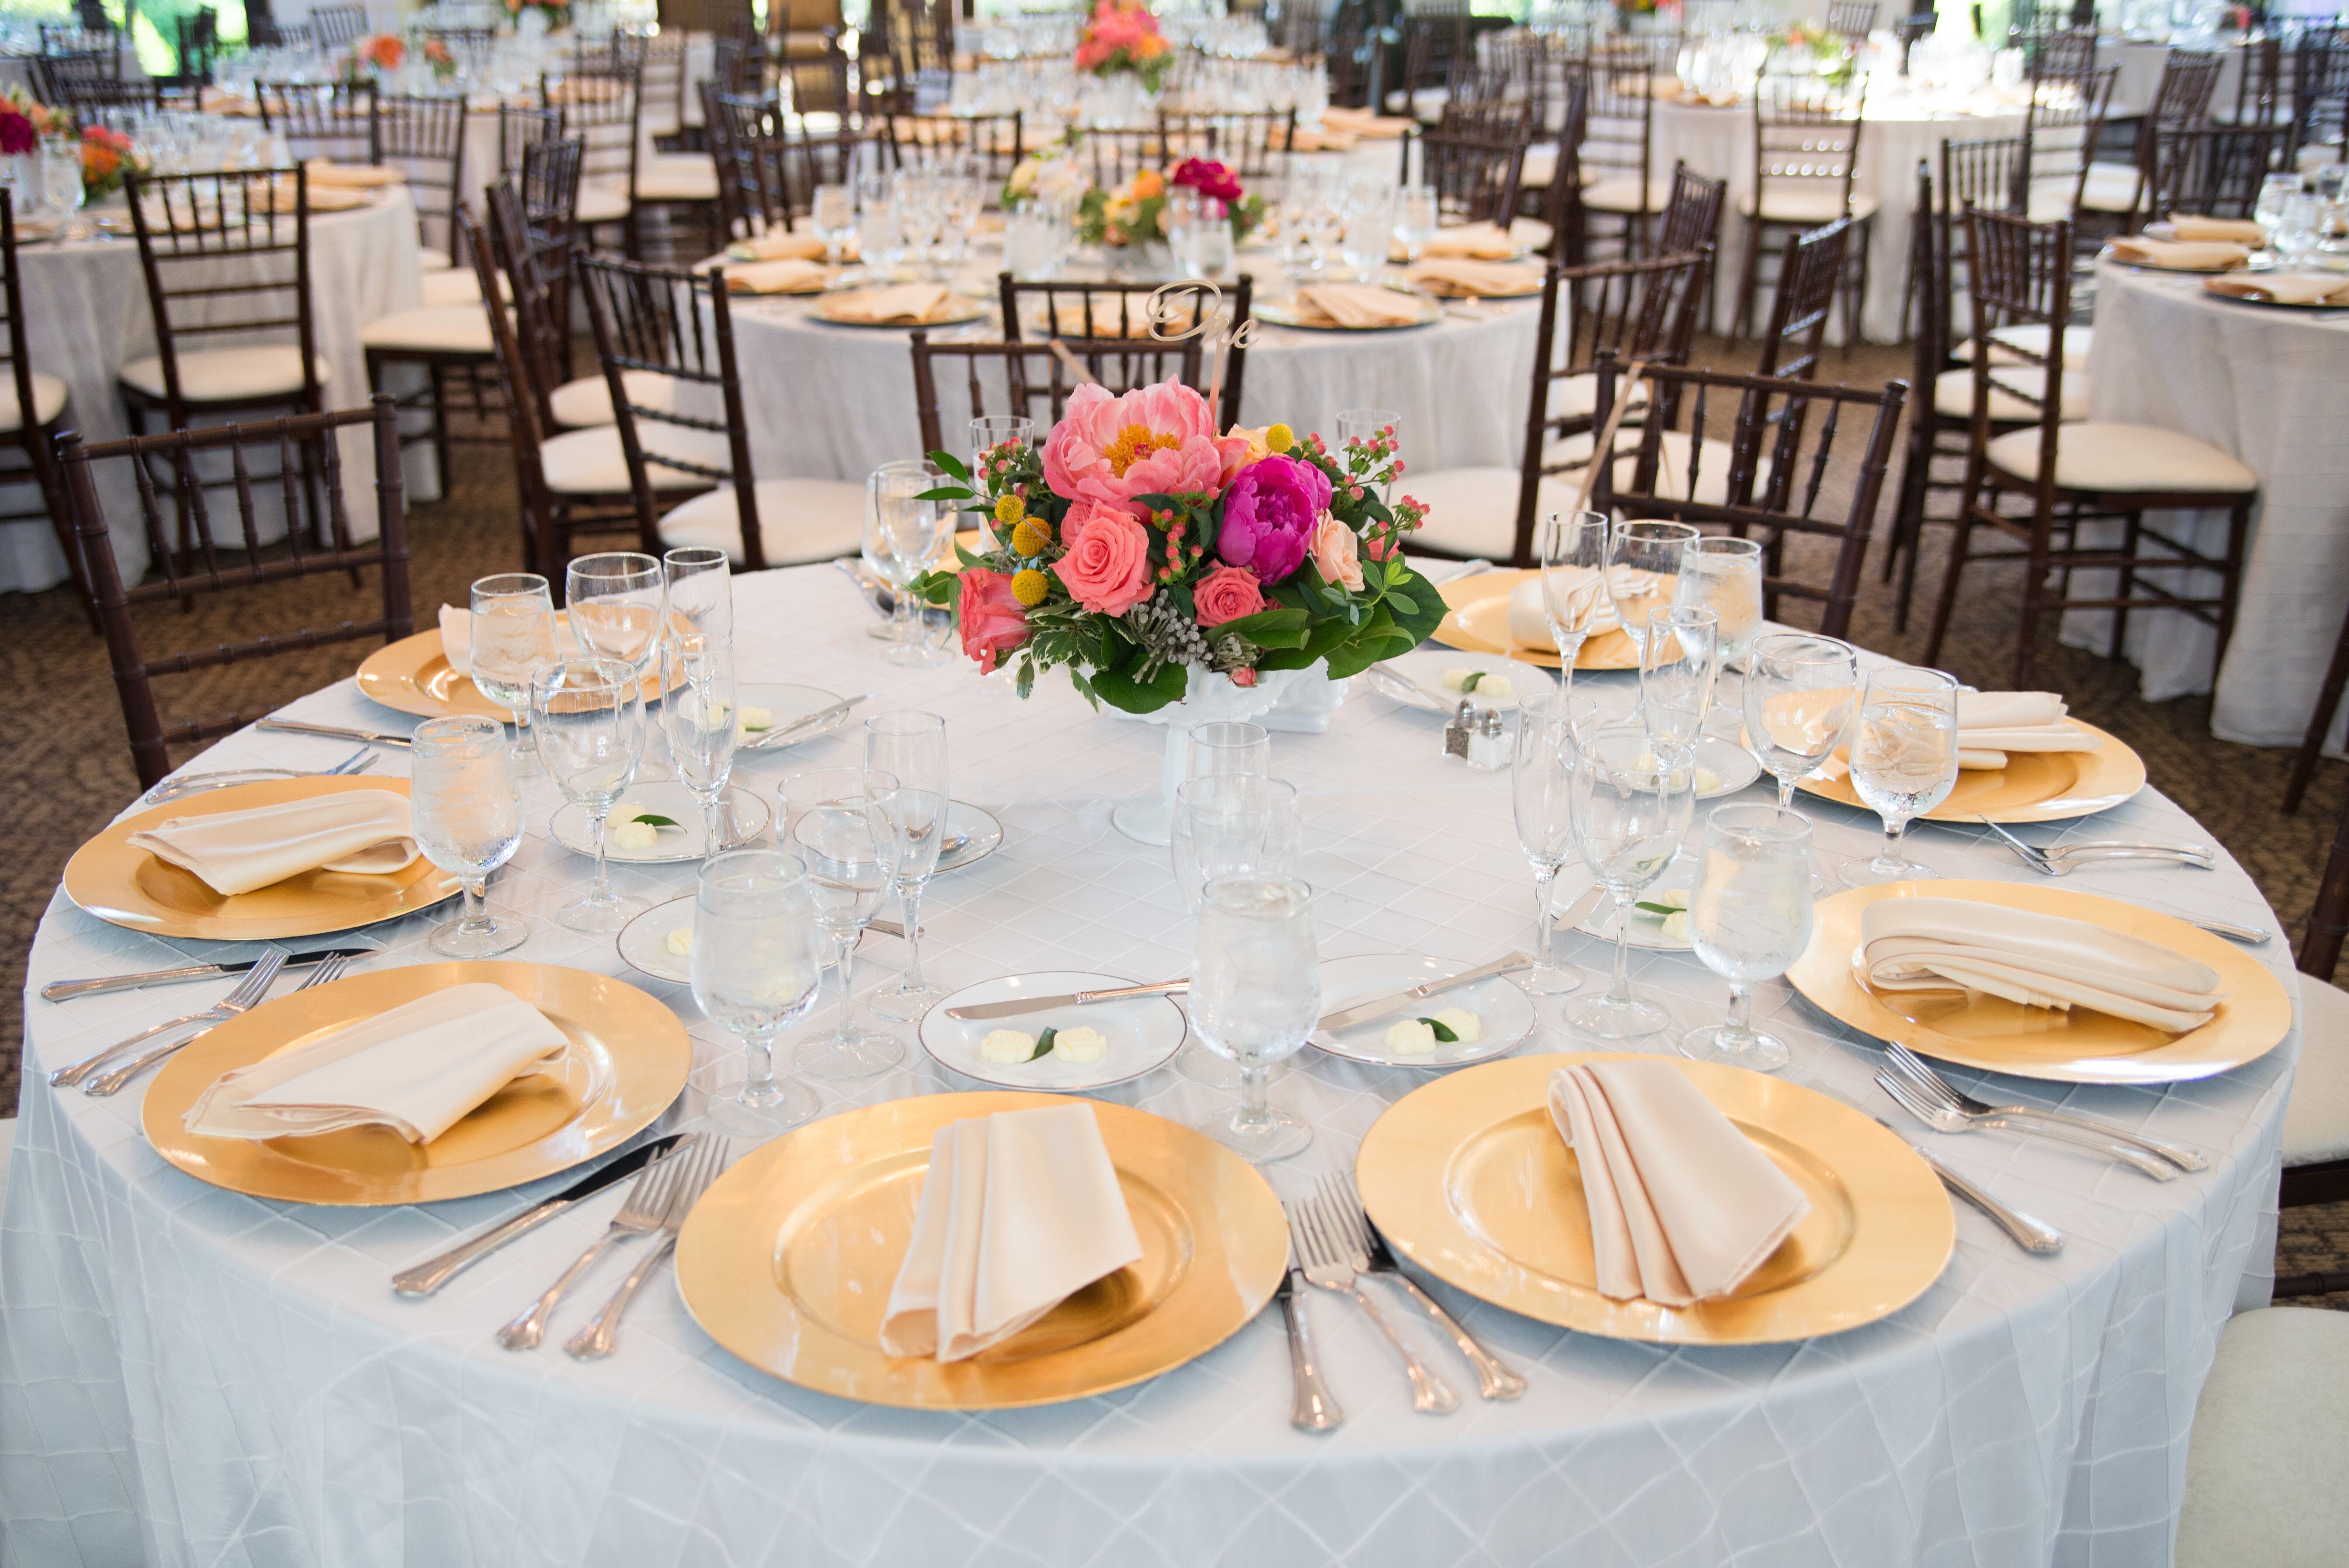 Gold Flatware and White Tablecloths